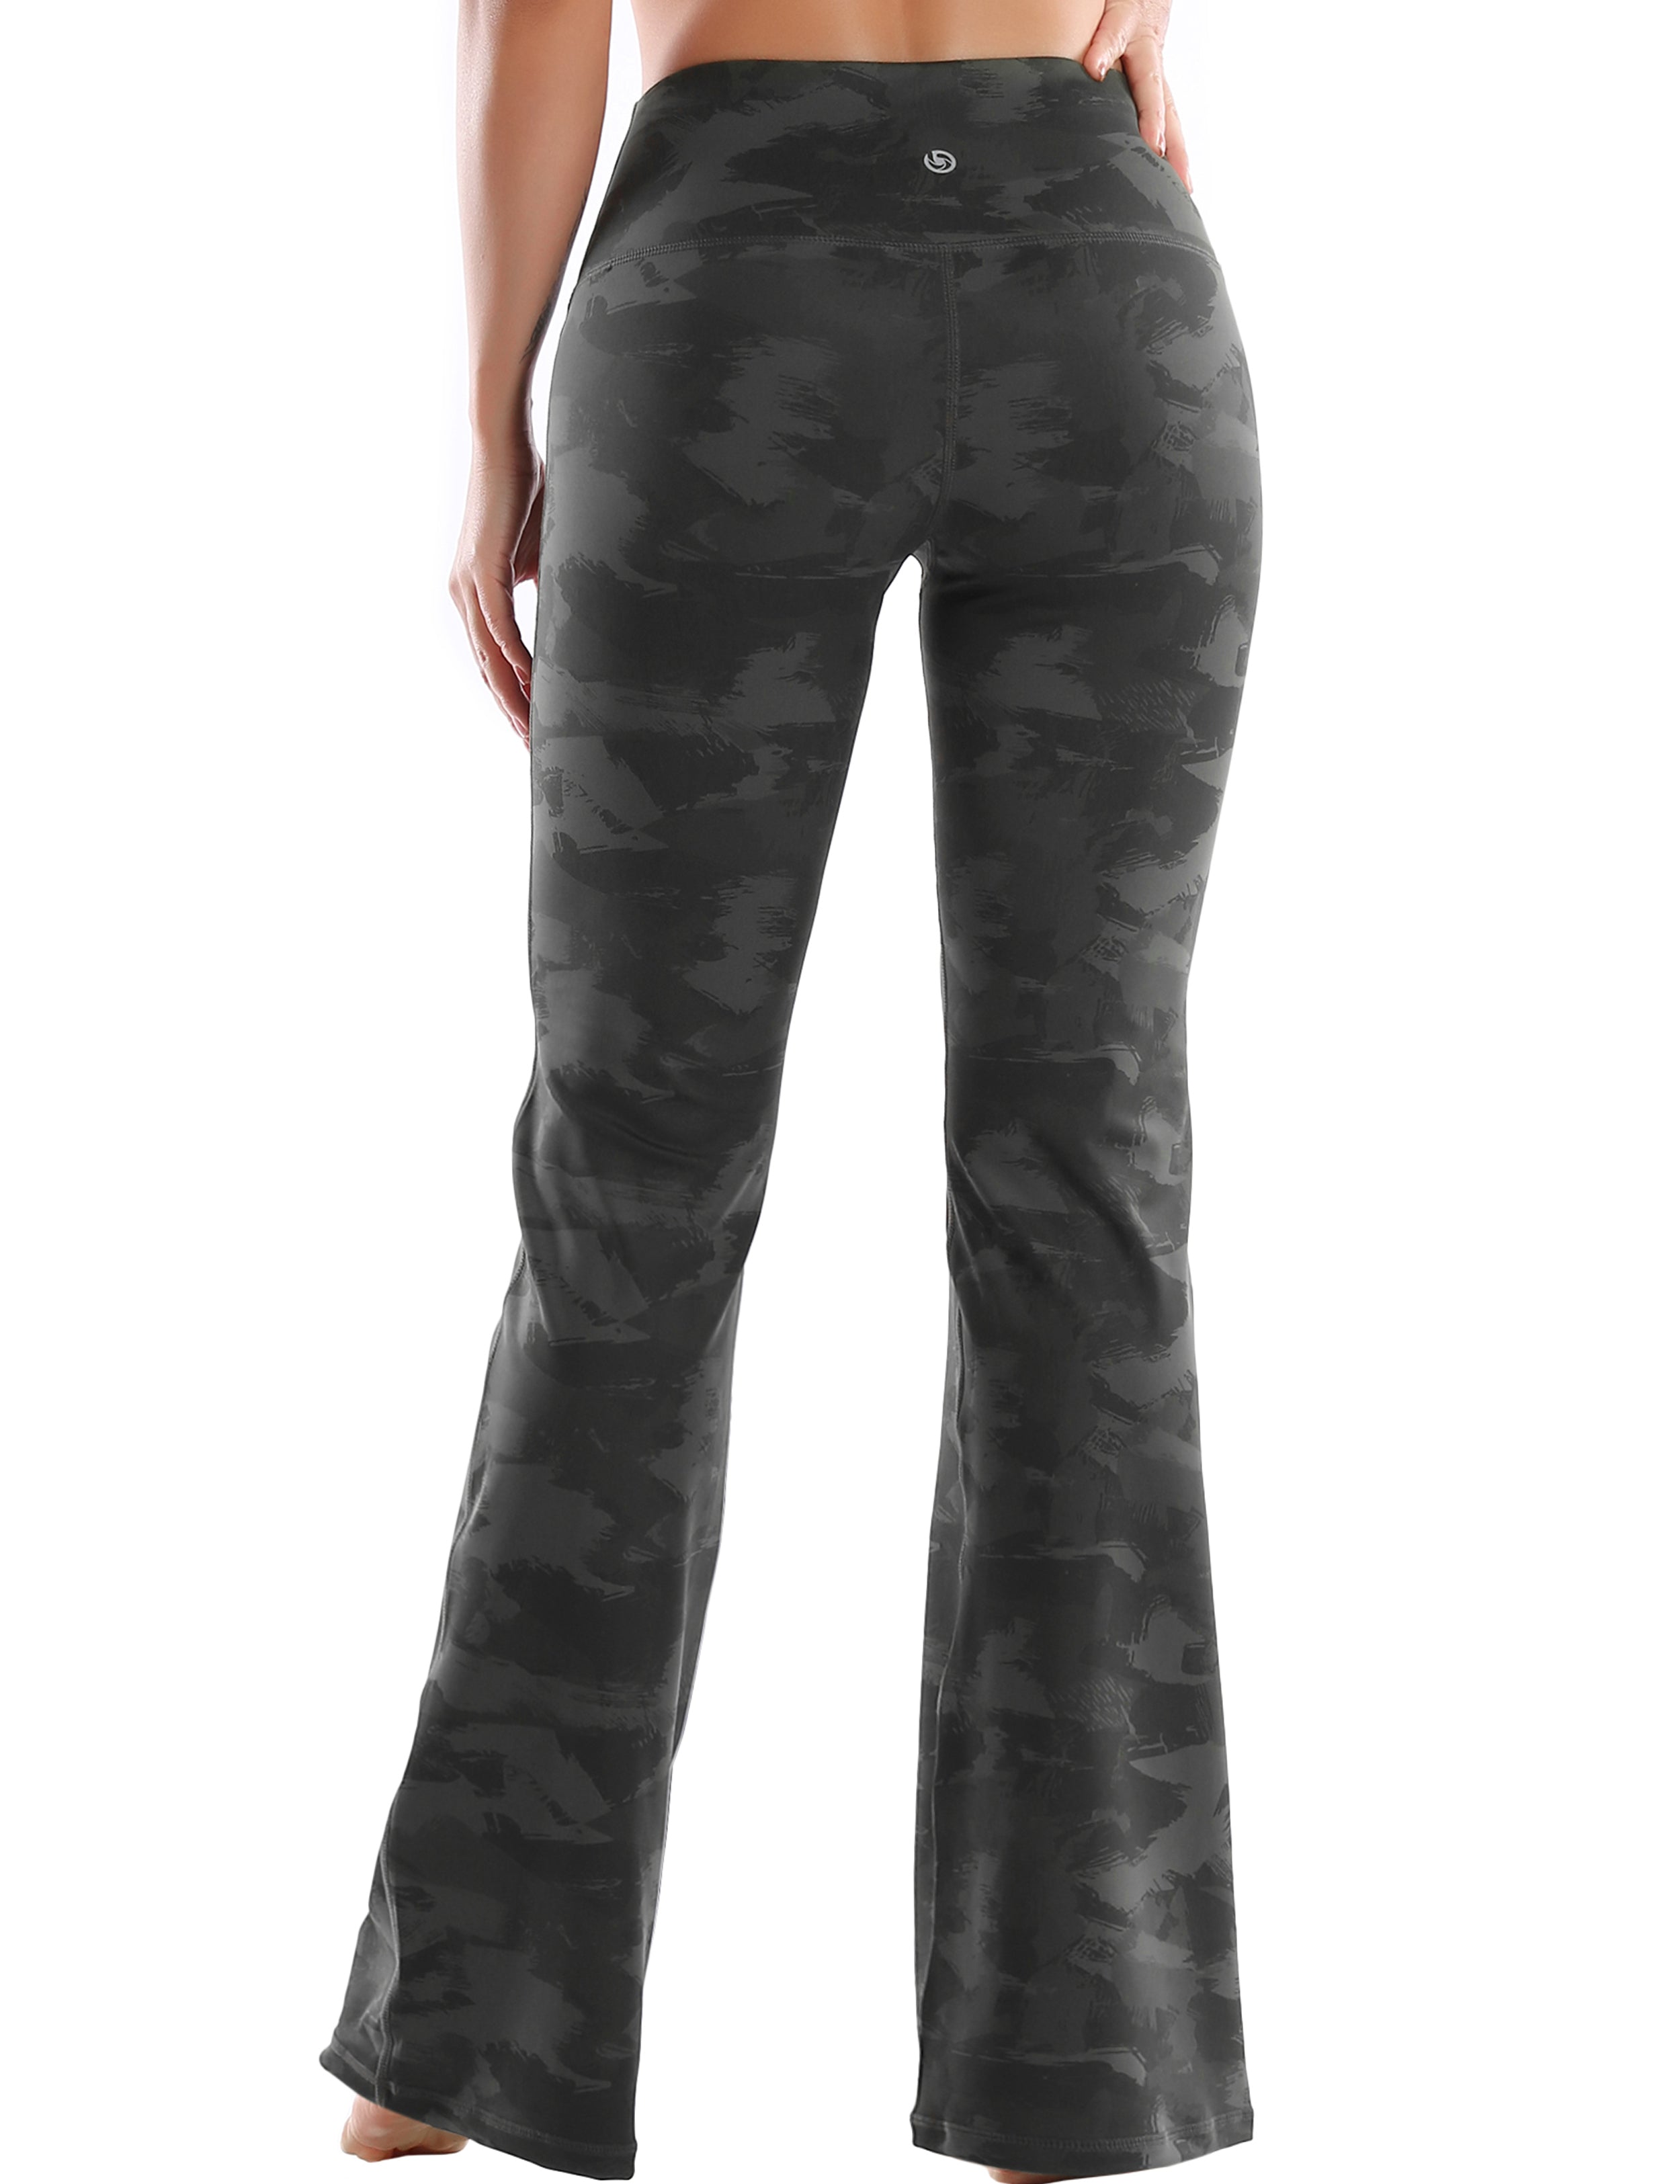 High Waist Printed Bootcut Leggings dimgray brushcamo 78%Polyester/22%Spandex Fabric doesn't attract lint easily 4-way stretch No see-through Moisture-wicking Tummy control Inner pocket Five lengths